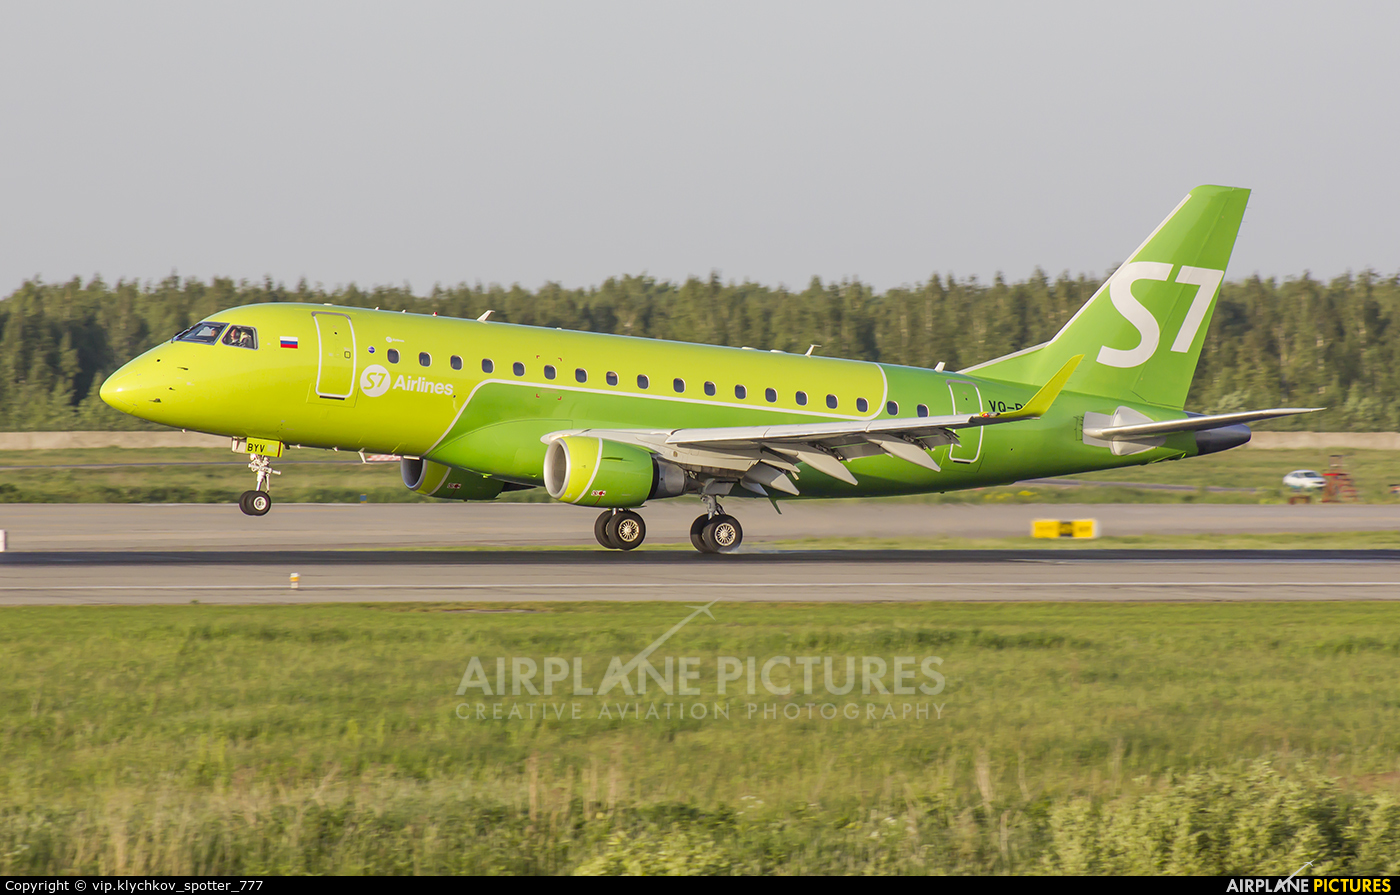 S7 Airlines VQ-BYV aircraft at Moscow - Domodedovo